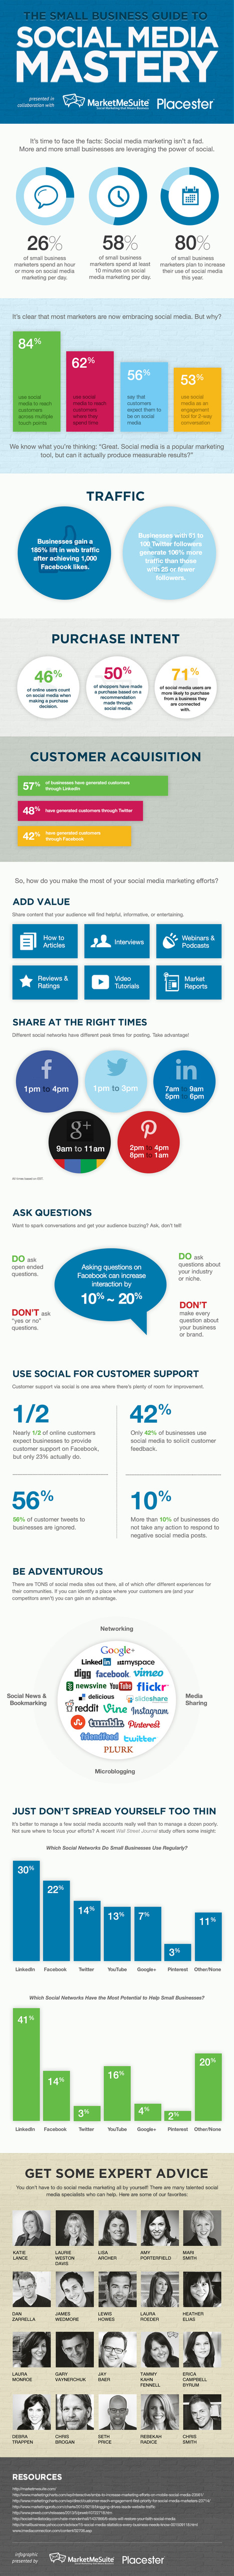 Why social media actually works for small business [infographic] | Design, Science and Technology | Scoop.it